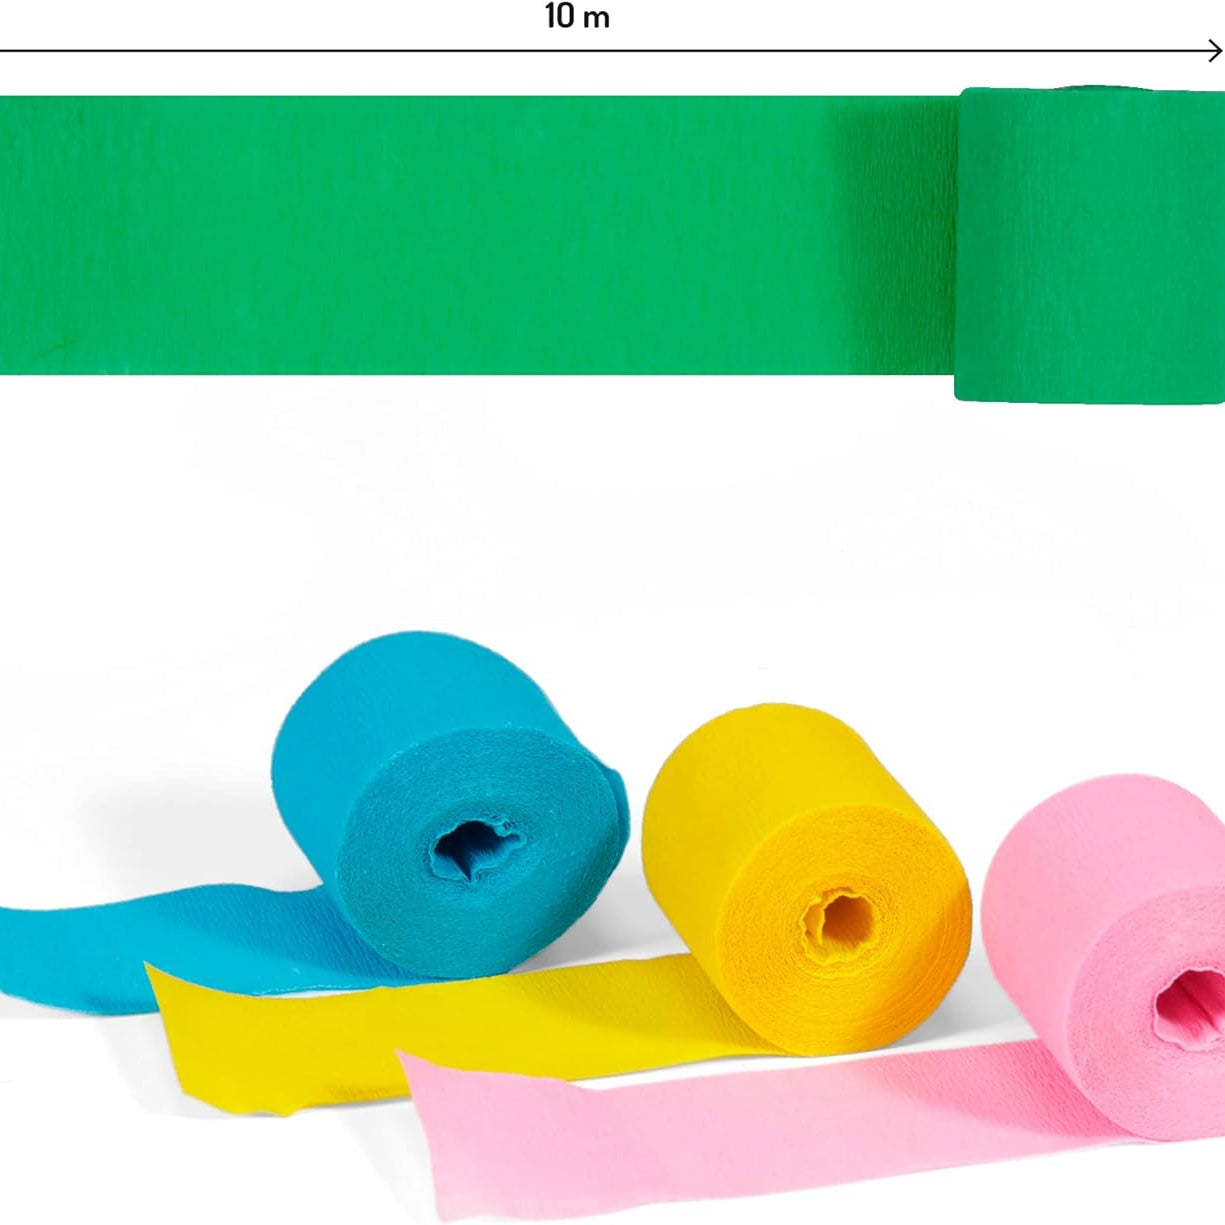 CLAIREFONTAINE Crepe Paper Strips 5cmx10M 4s Spring Assortment